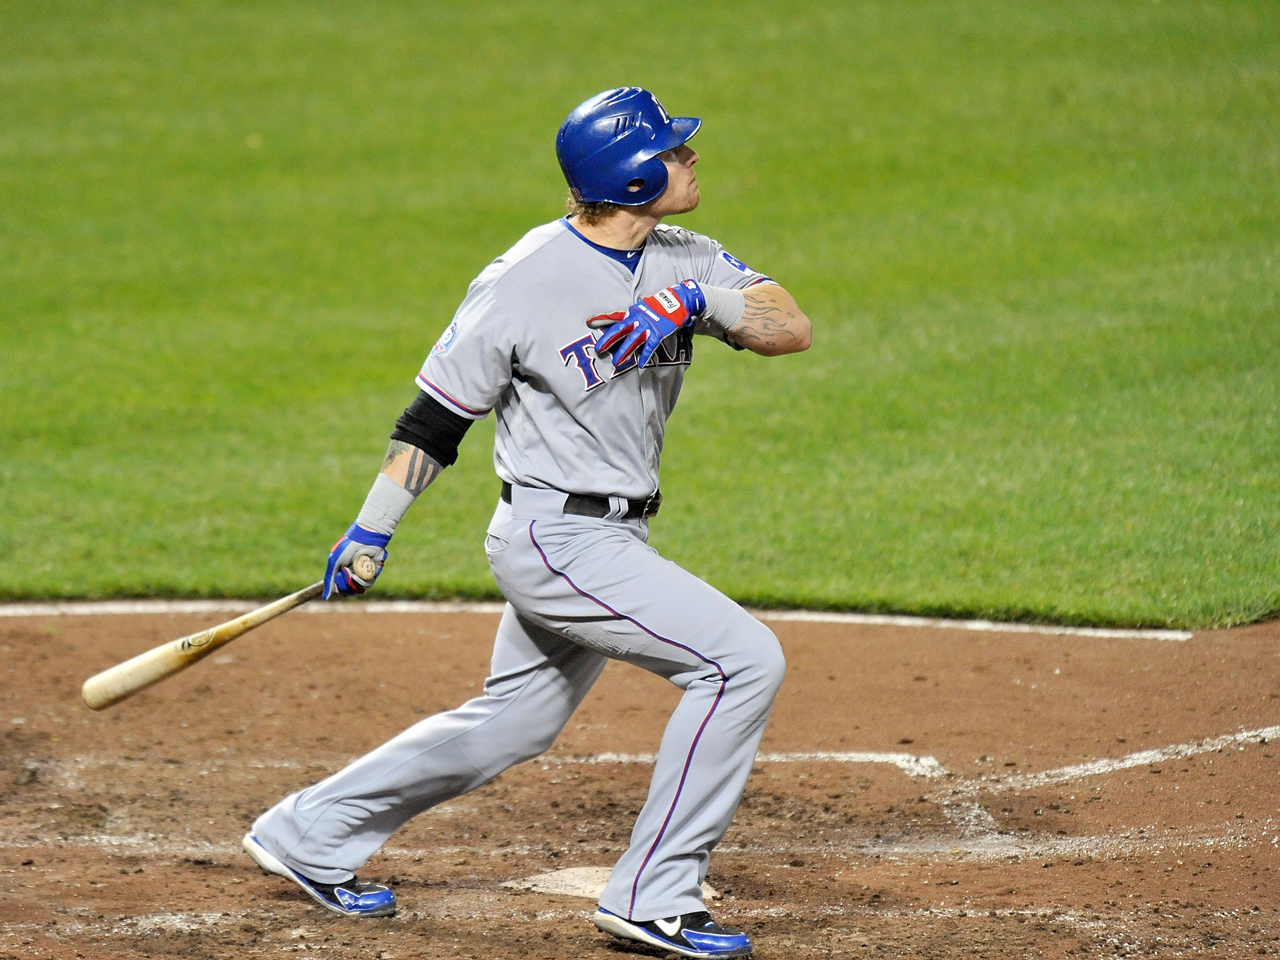 May 8, 2012: Rangers' Josh Hamilton hits four homers in one game